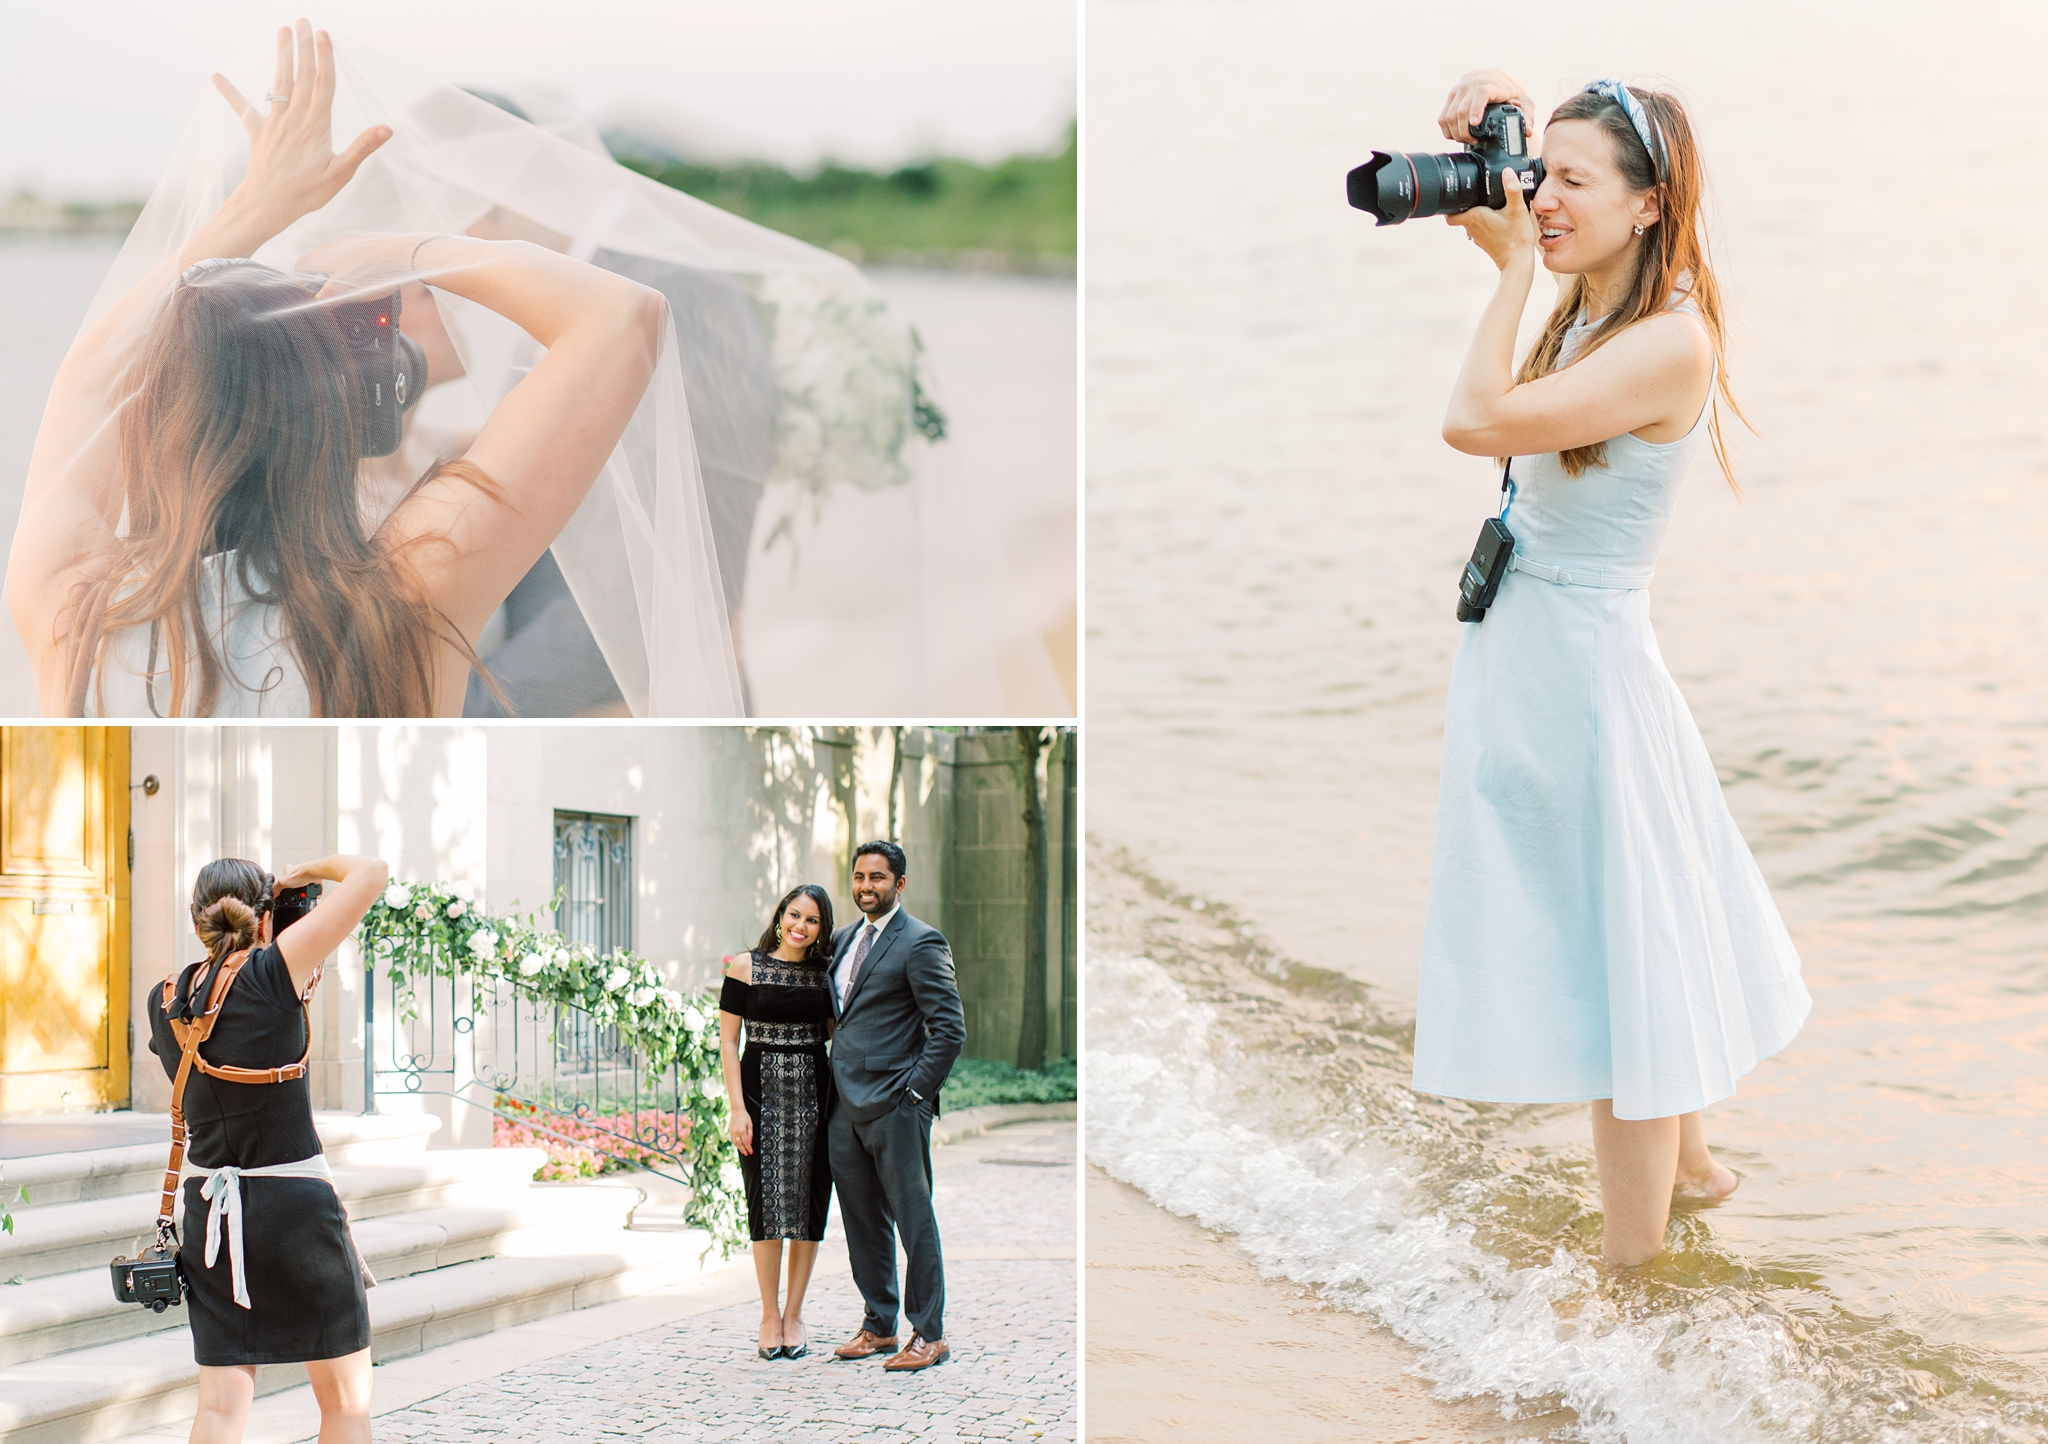 Go behind the scenes during the 2019 season with this Washington, DC wedding photographer to see all the fun that takes place on a client's big day!